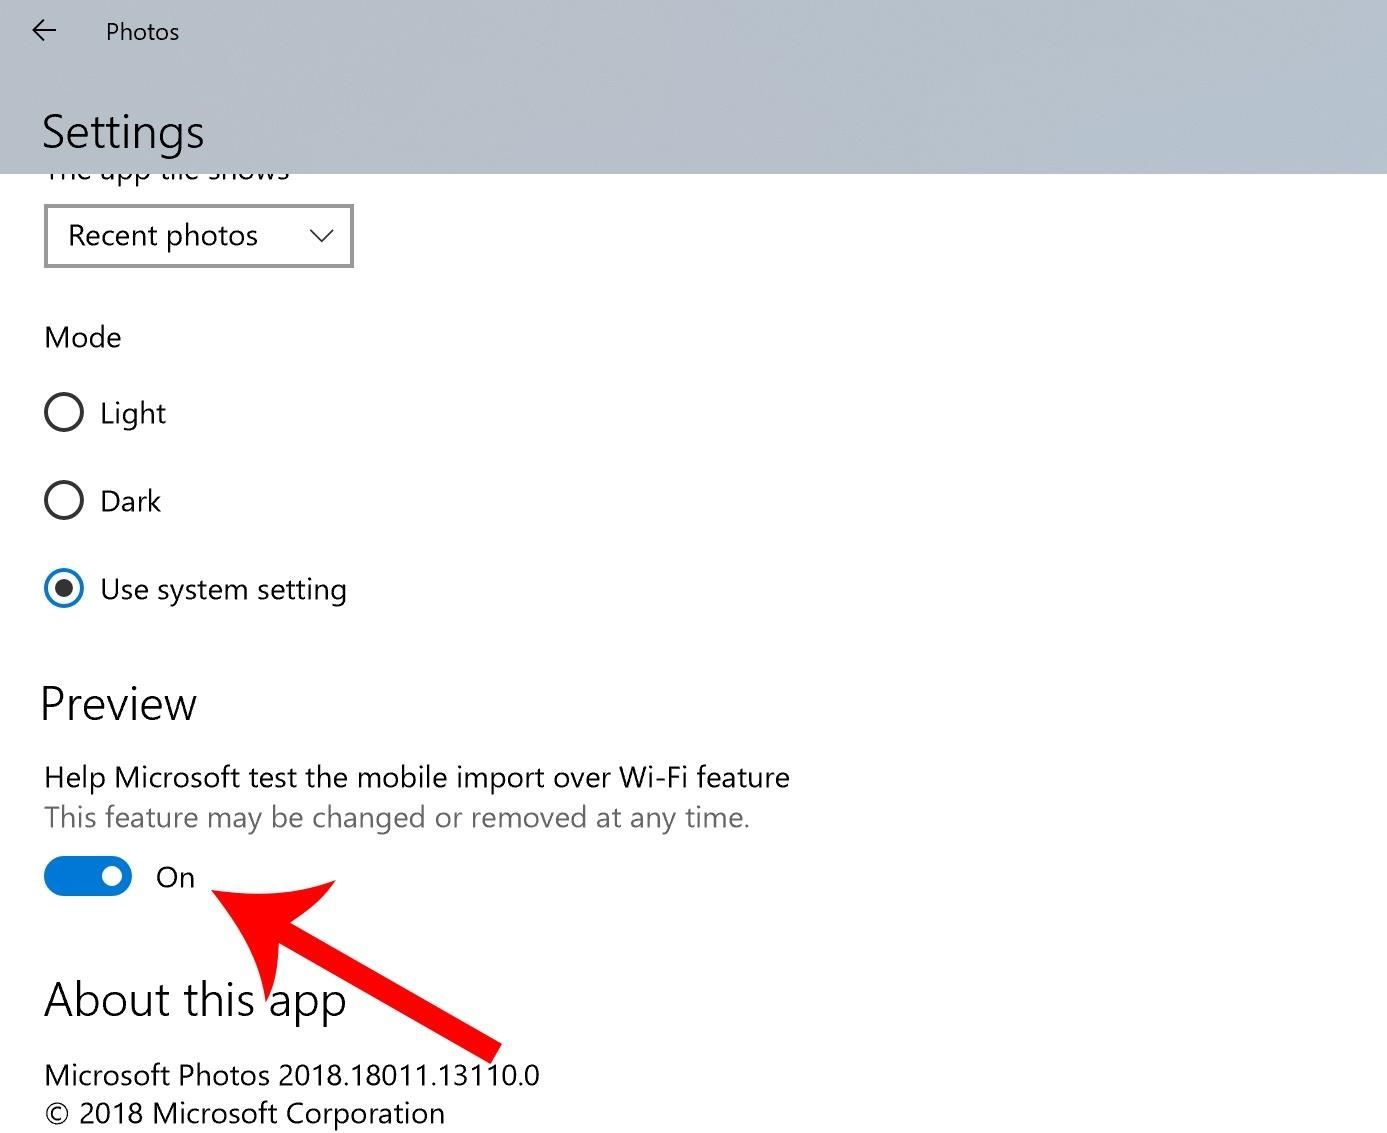 The Fastest Way to Transfer Photos & Videos from Your iPhone to Your Windows 10 PC